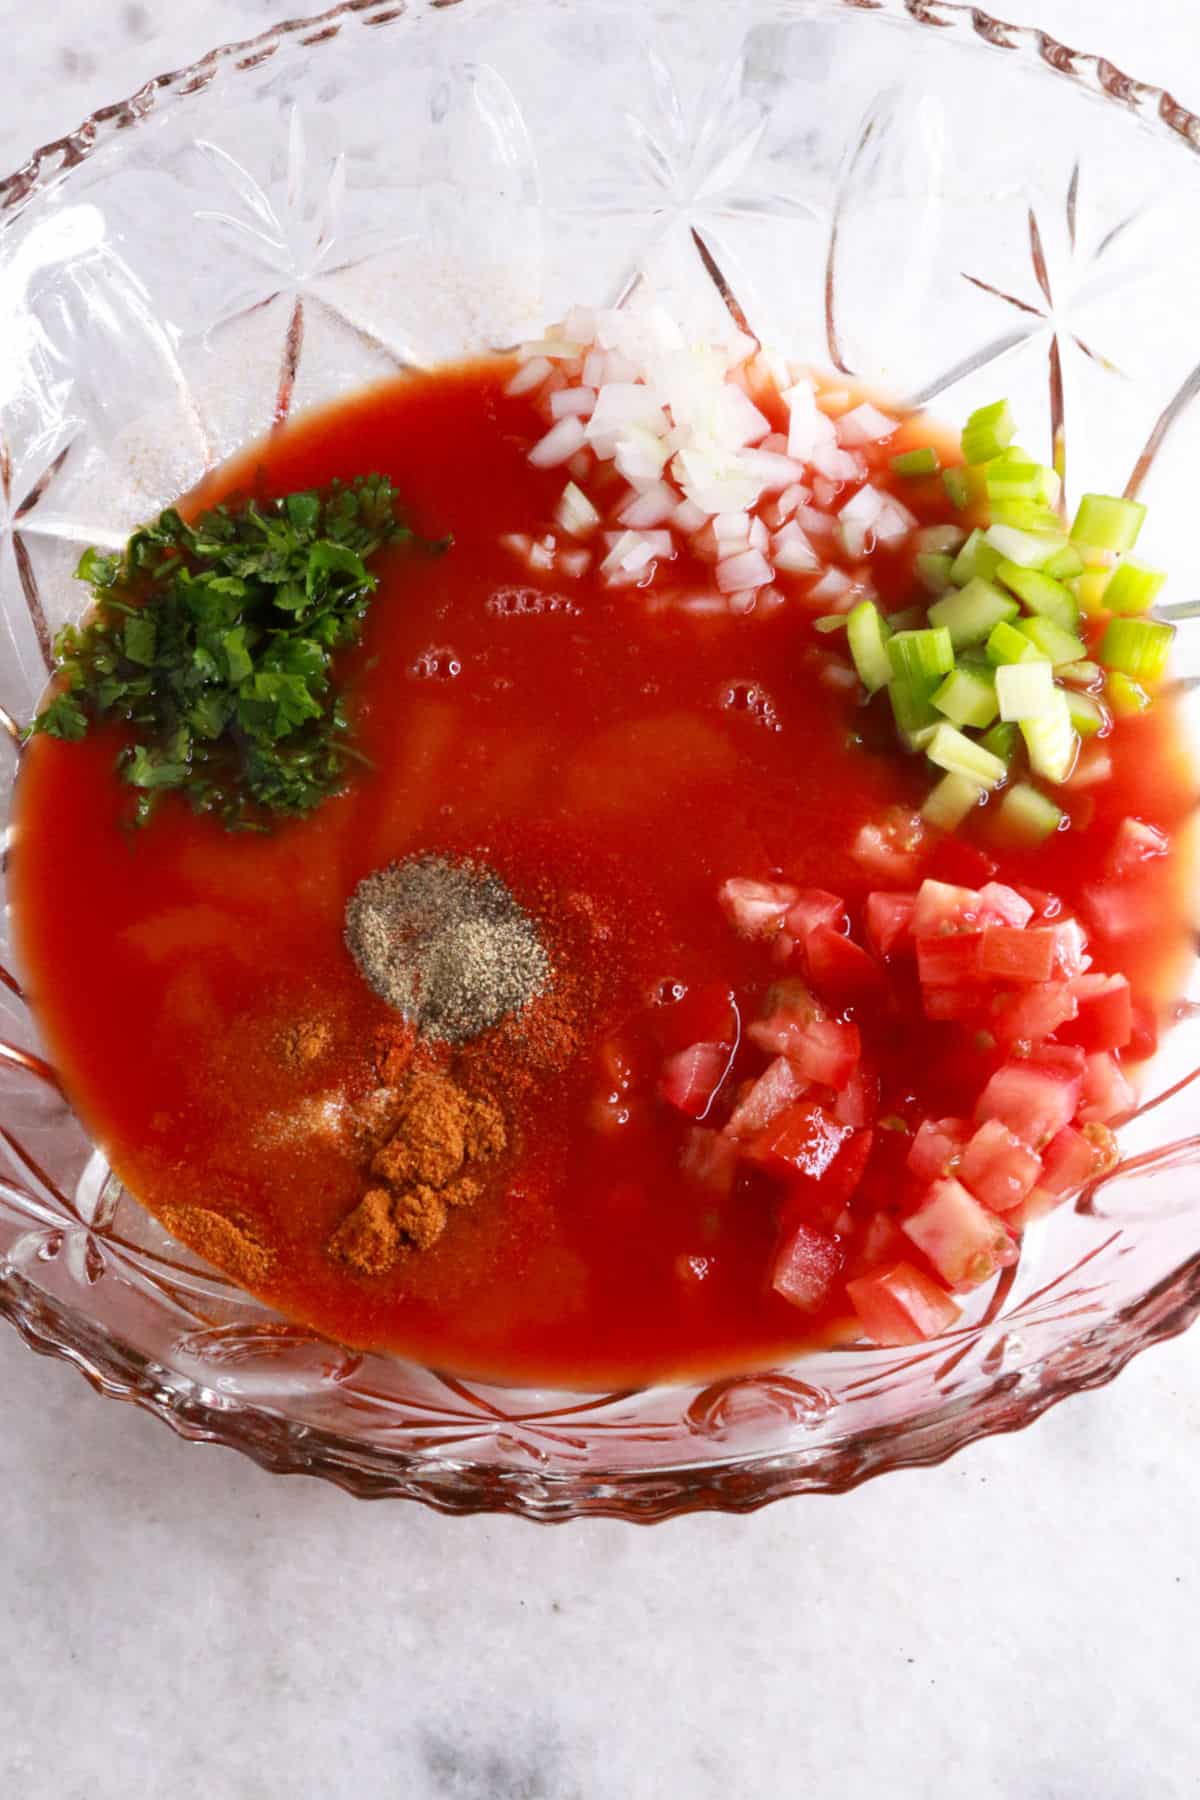 Glass mixing bowl with tomato sauce, spices and diced vegetables for coctel de Cameron